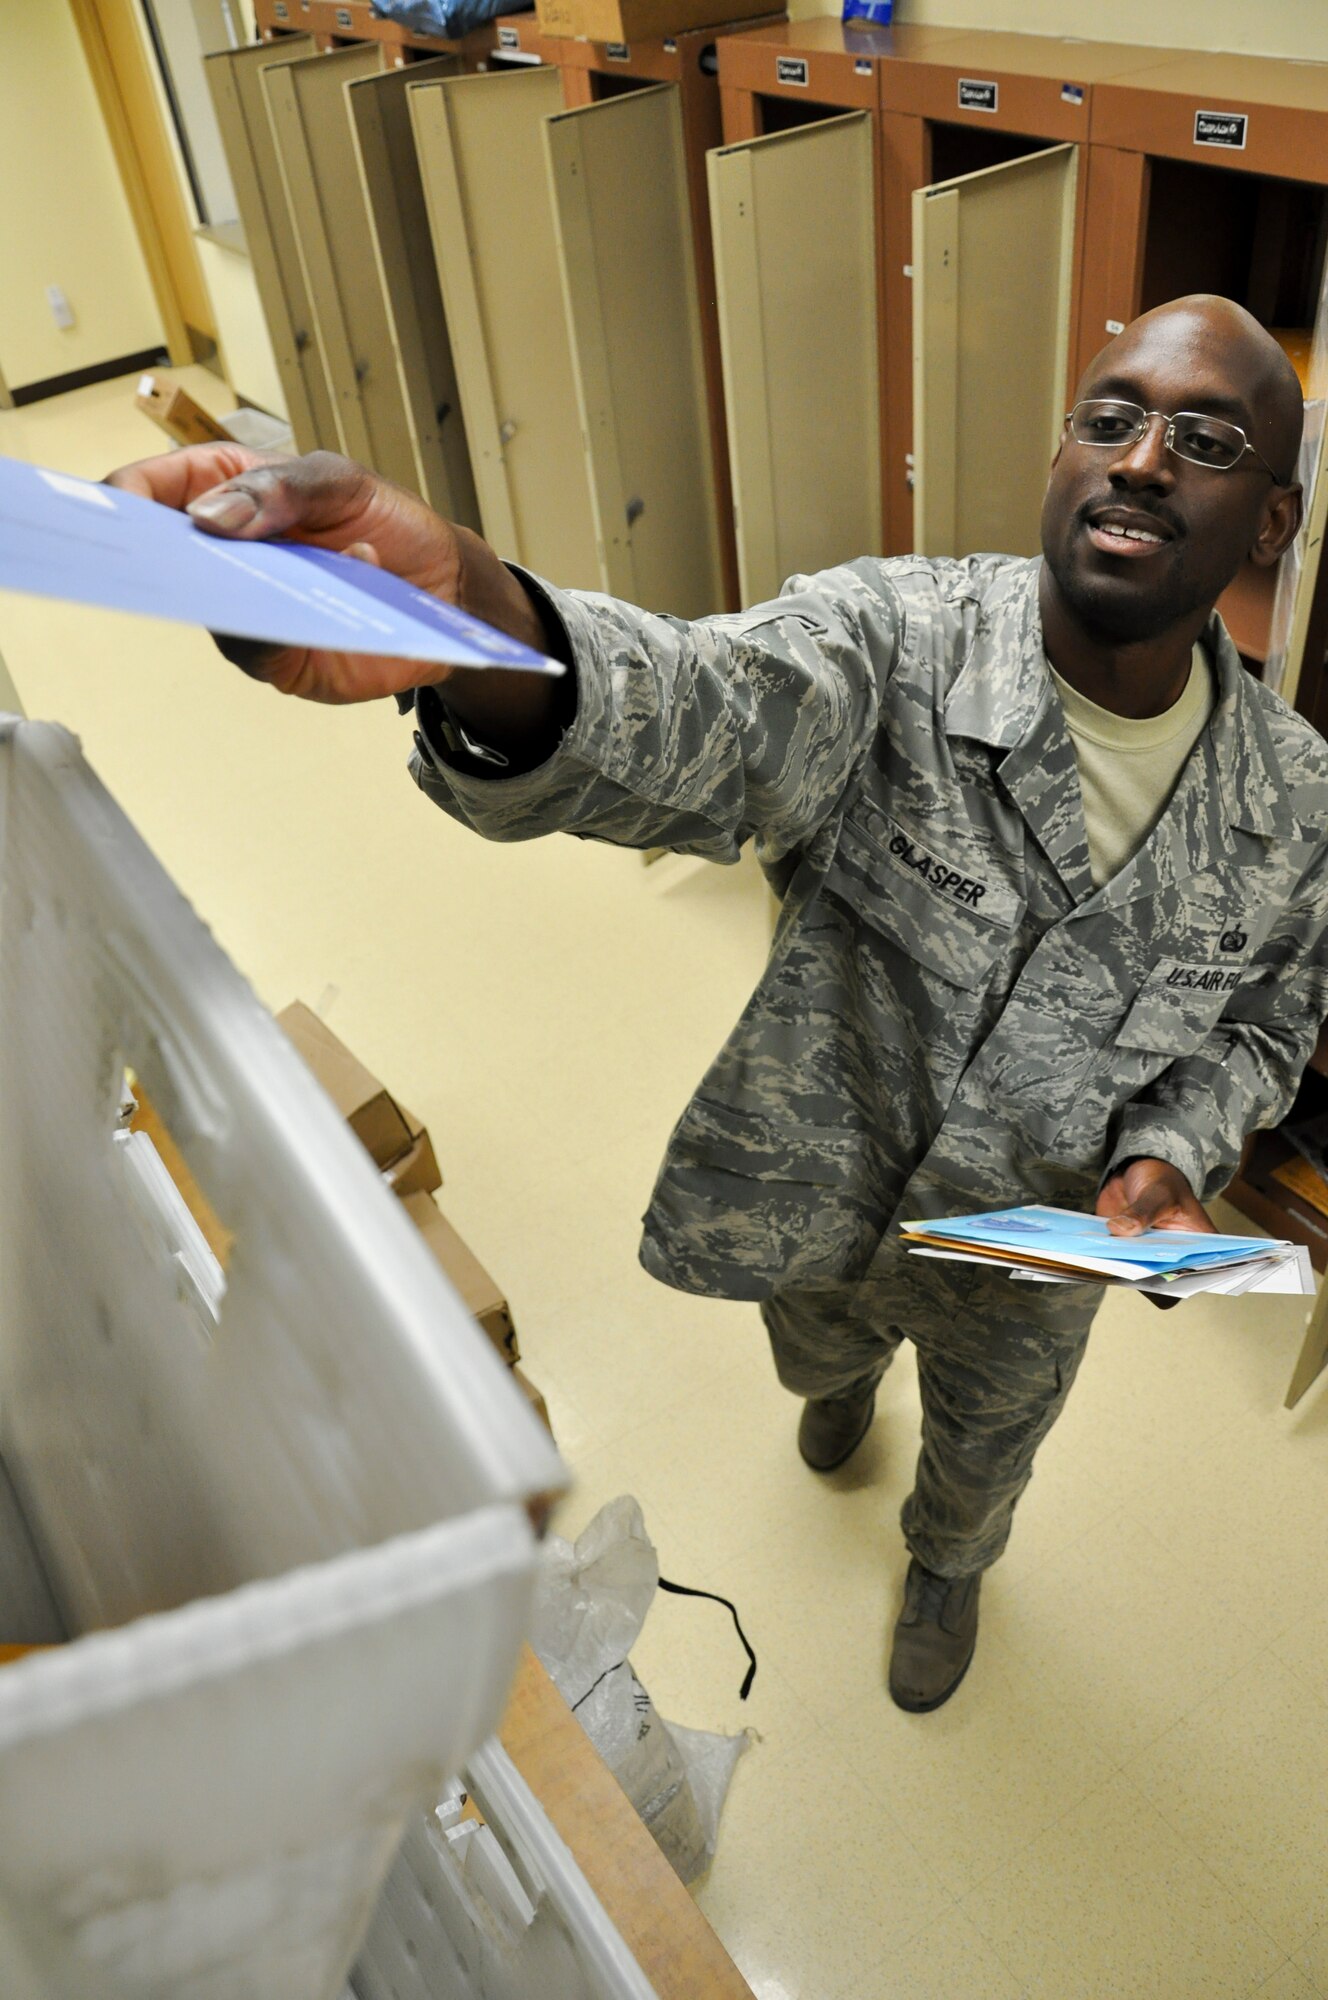 BUCLKEY AIR FORCE BASE, Colo. – Staff Sgt. Loywless Glasper, Buckley’s Official Mail Center organization mail technician, separates mail into organizational containers.  The mail center provides service for these 99 consolidated organizations across the 22 on-base and one off-base mail stops it makes.  (U.S. Air Force photo by Staff Sgt. Nicholas Rau)